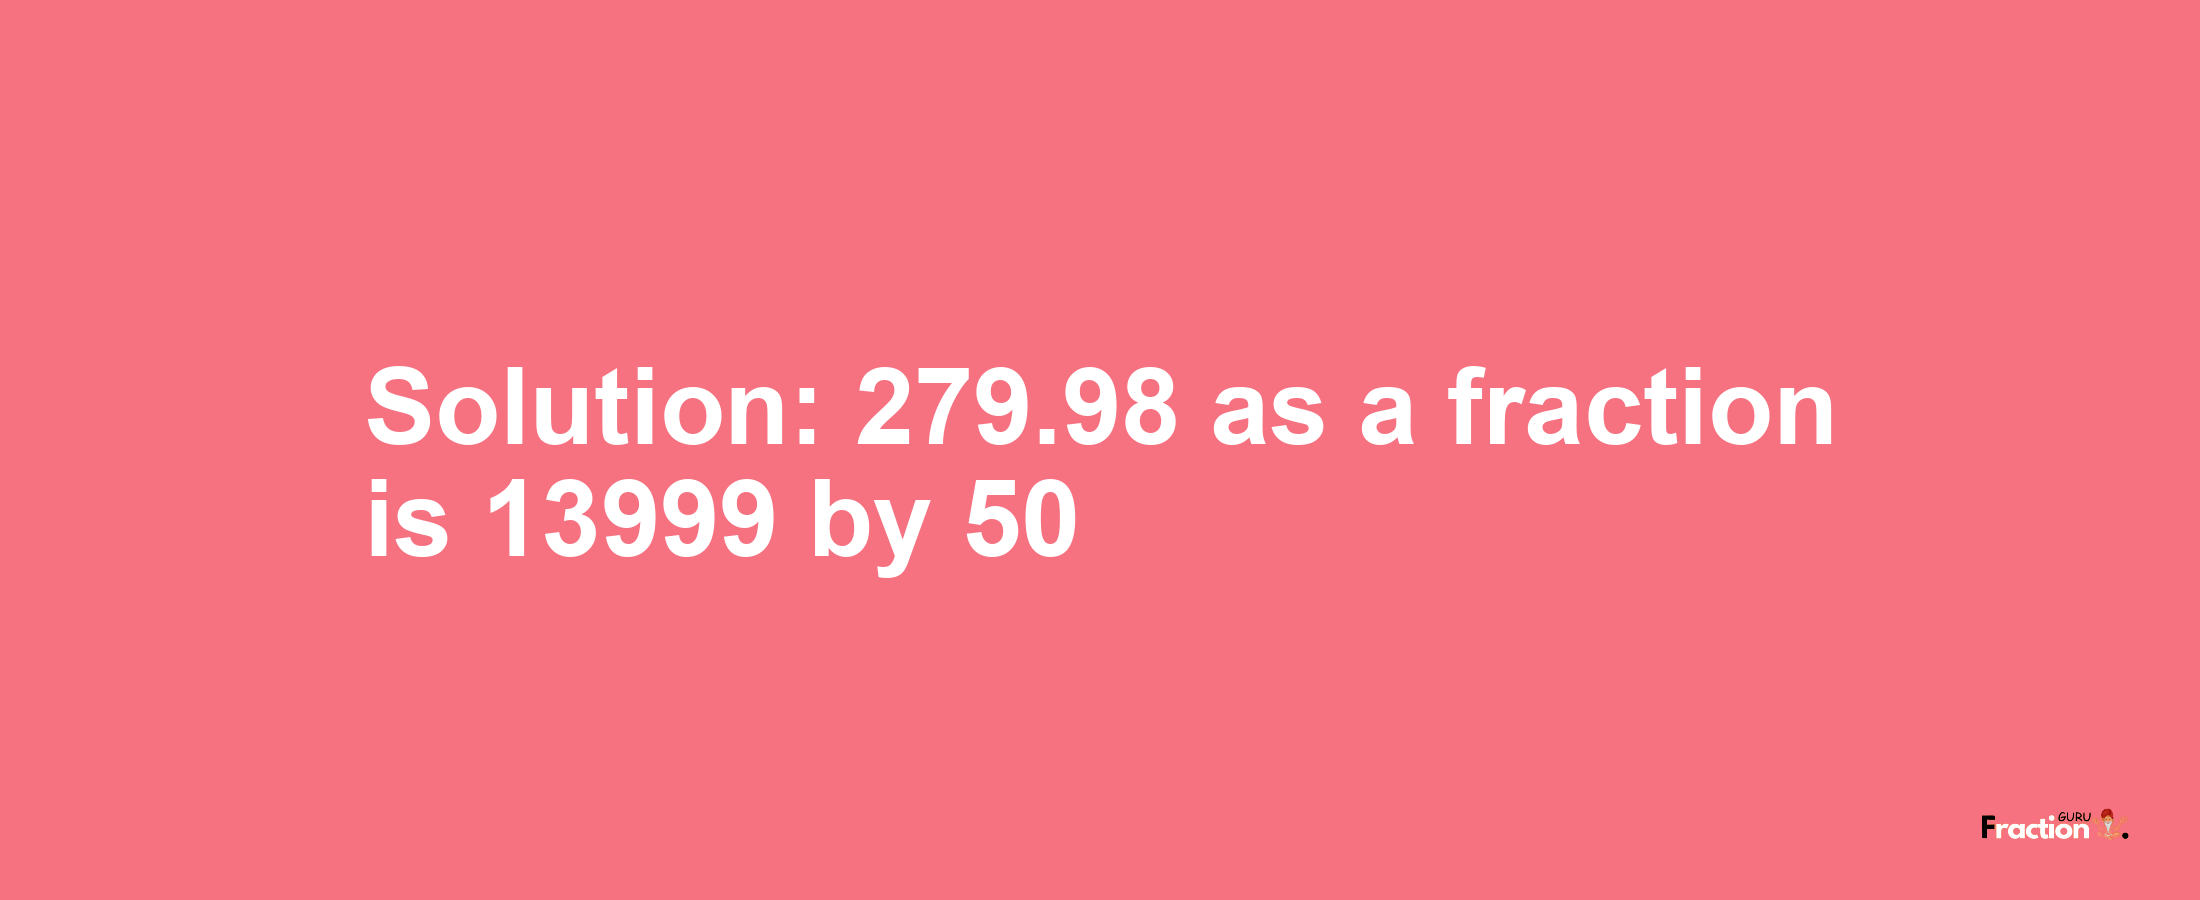 Solution:279.98 as a fraction is 13999/50